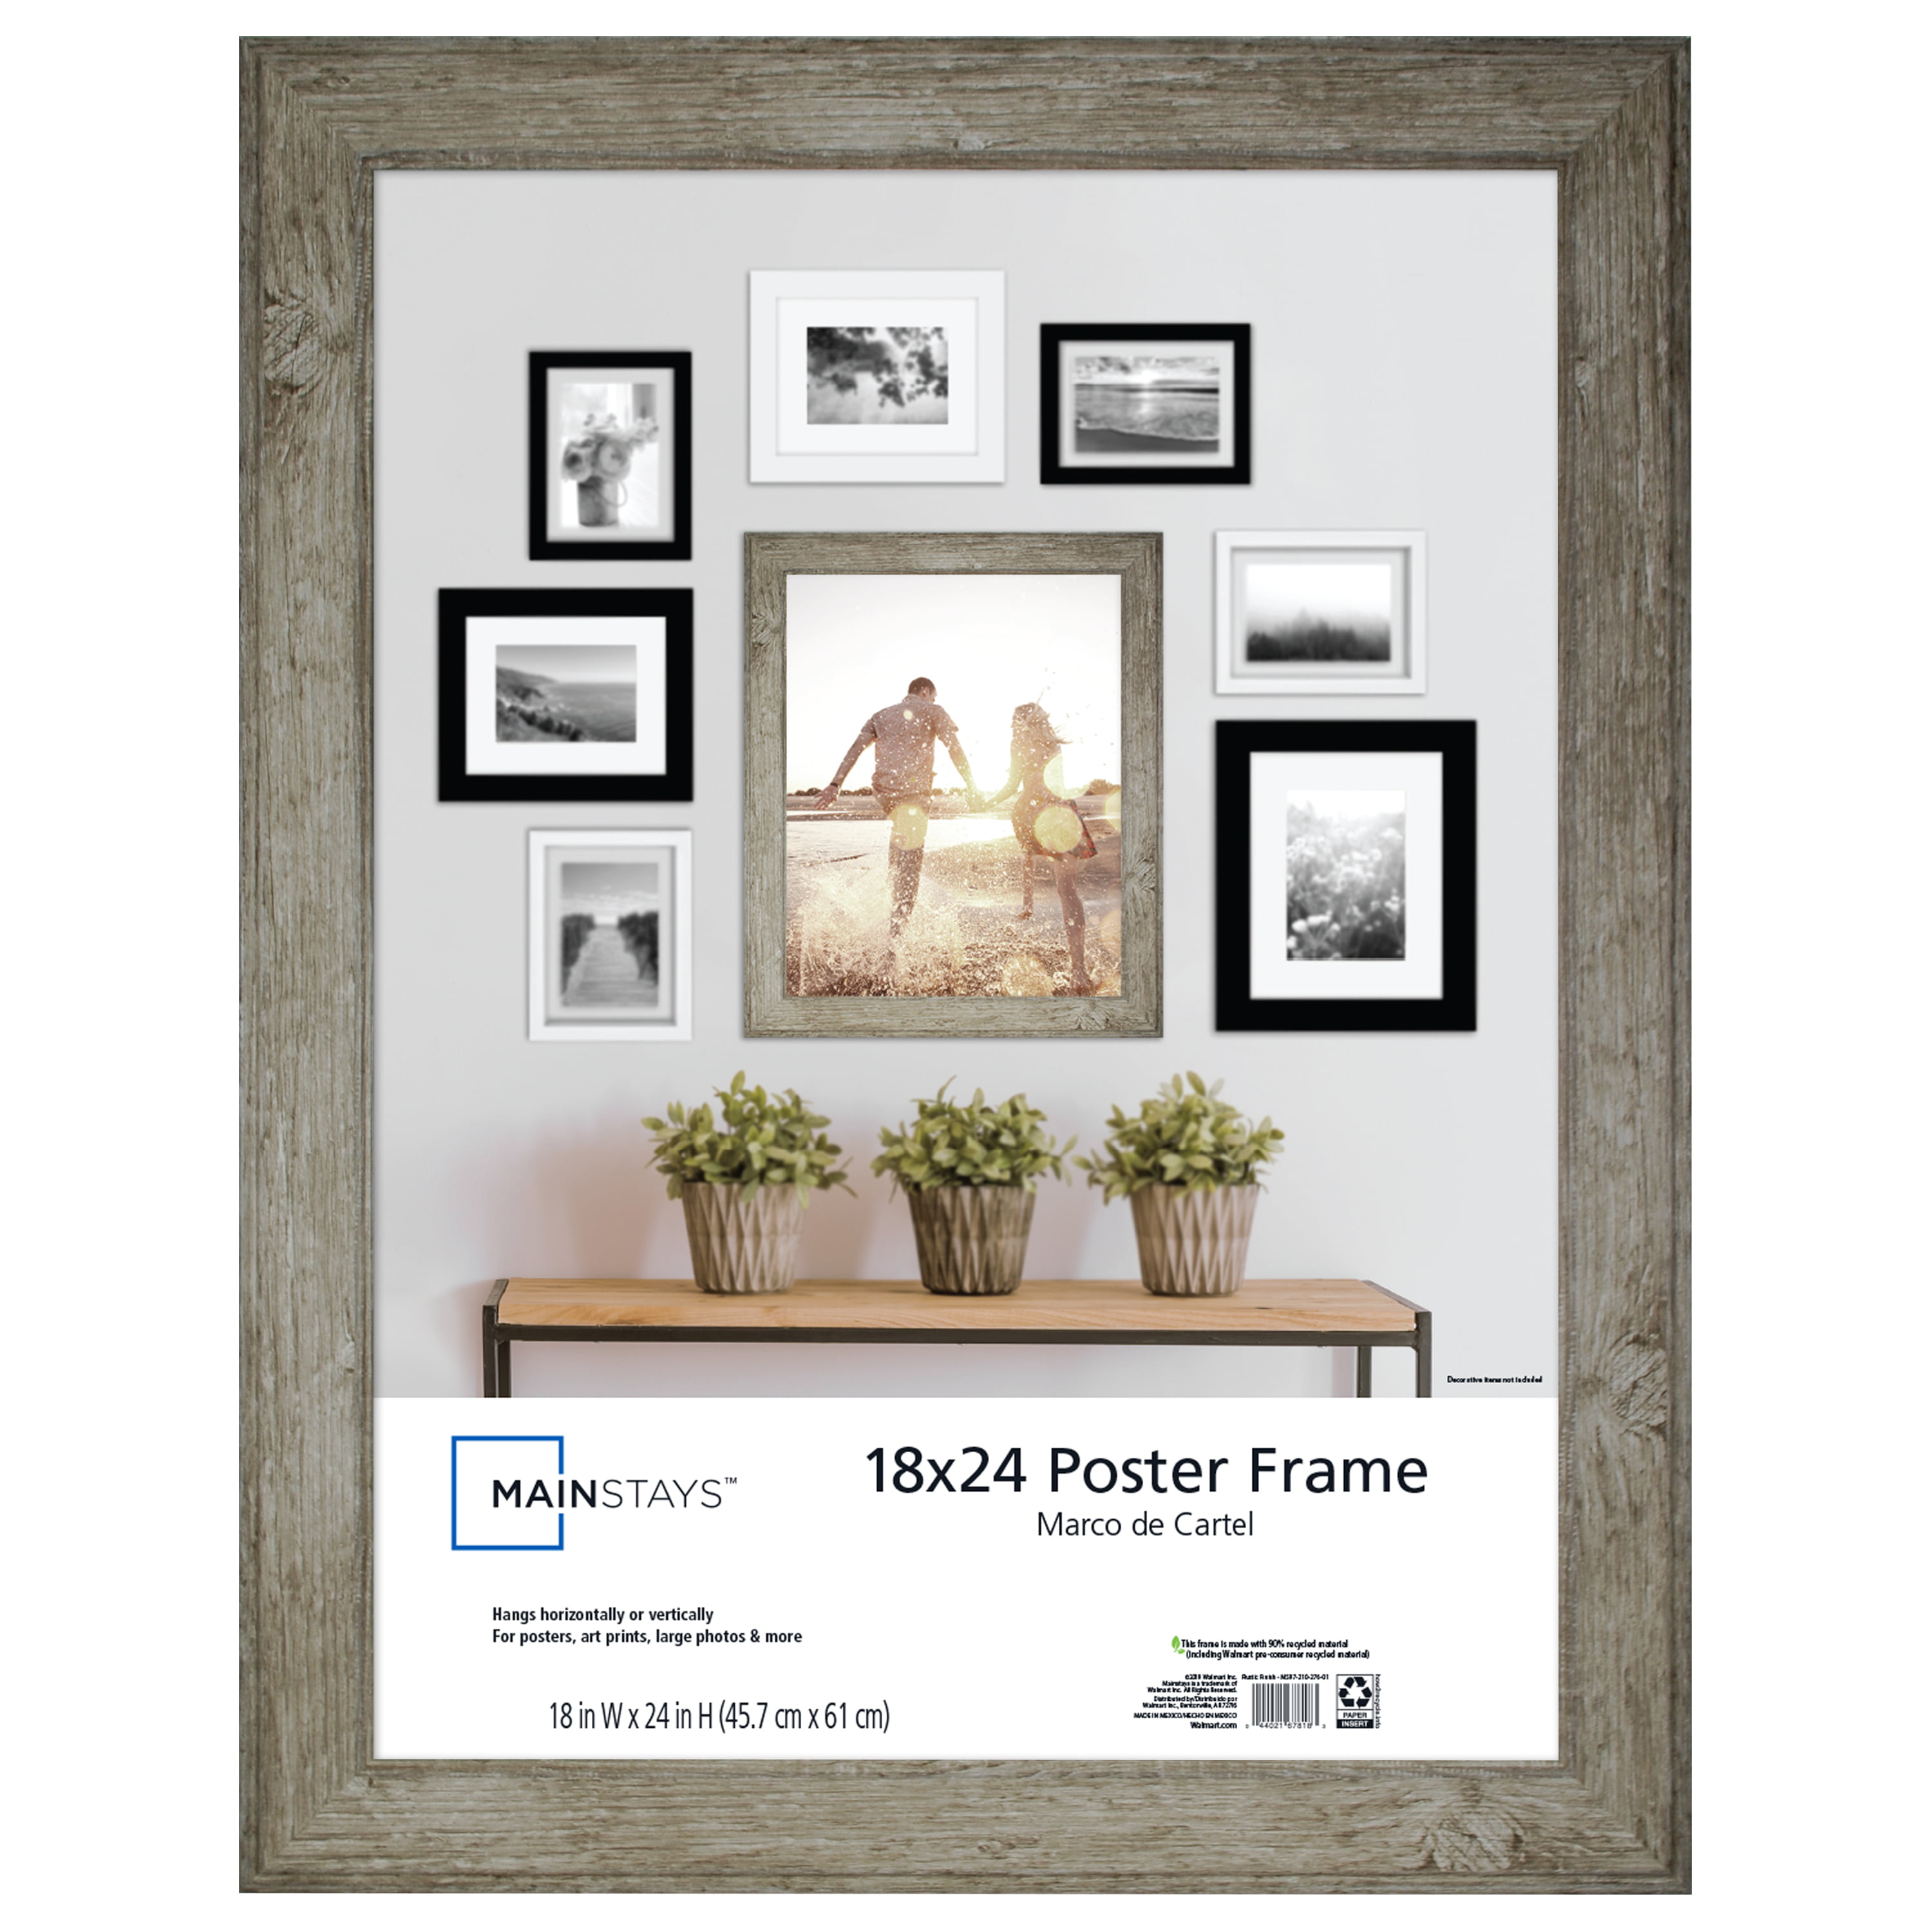 18x24 poster frame with mat